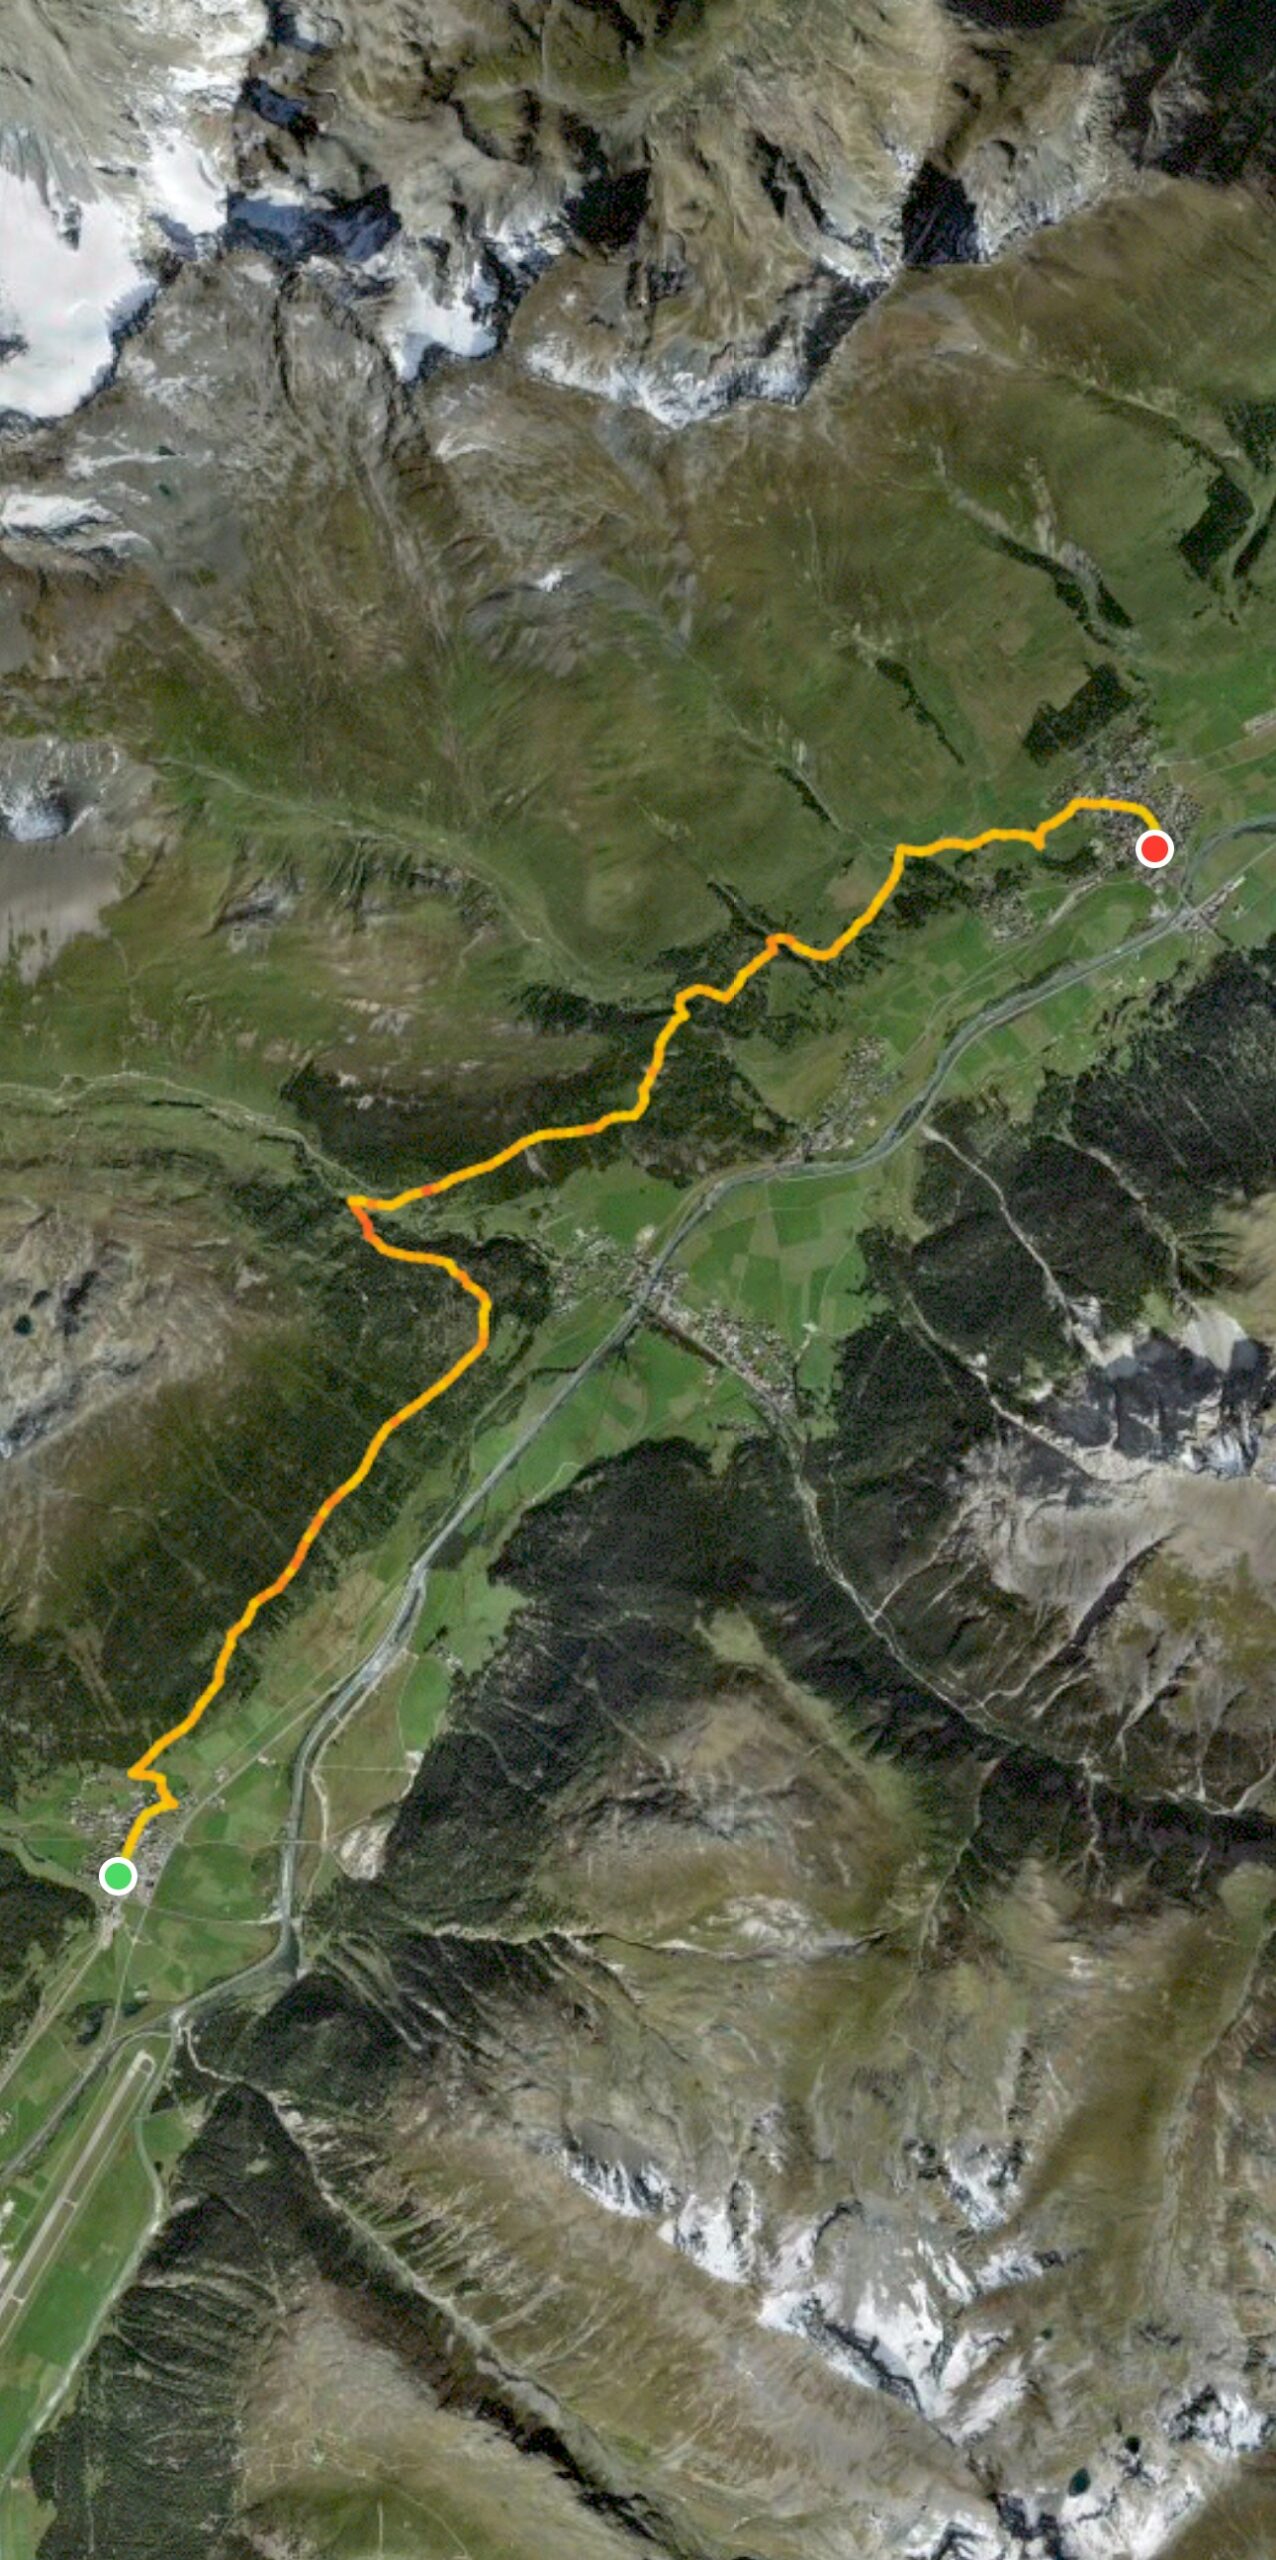 Hiking track overlaid on satellite imagery depicting stage 4 of the via engiadina, running between the towns of Bever and Zuoz.